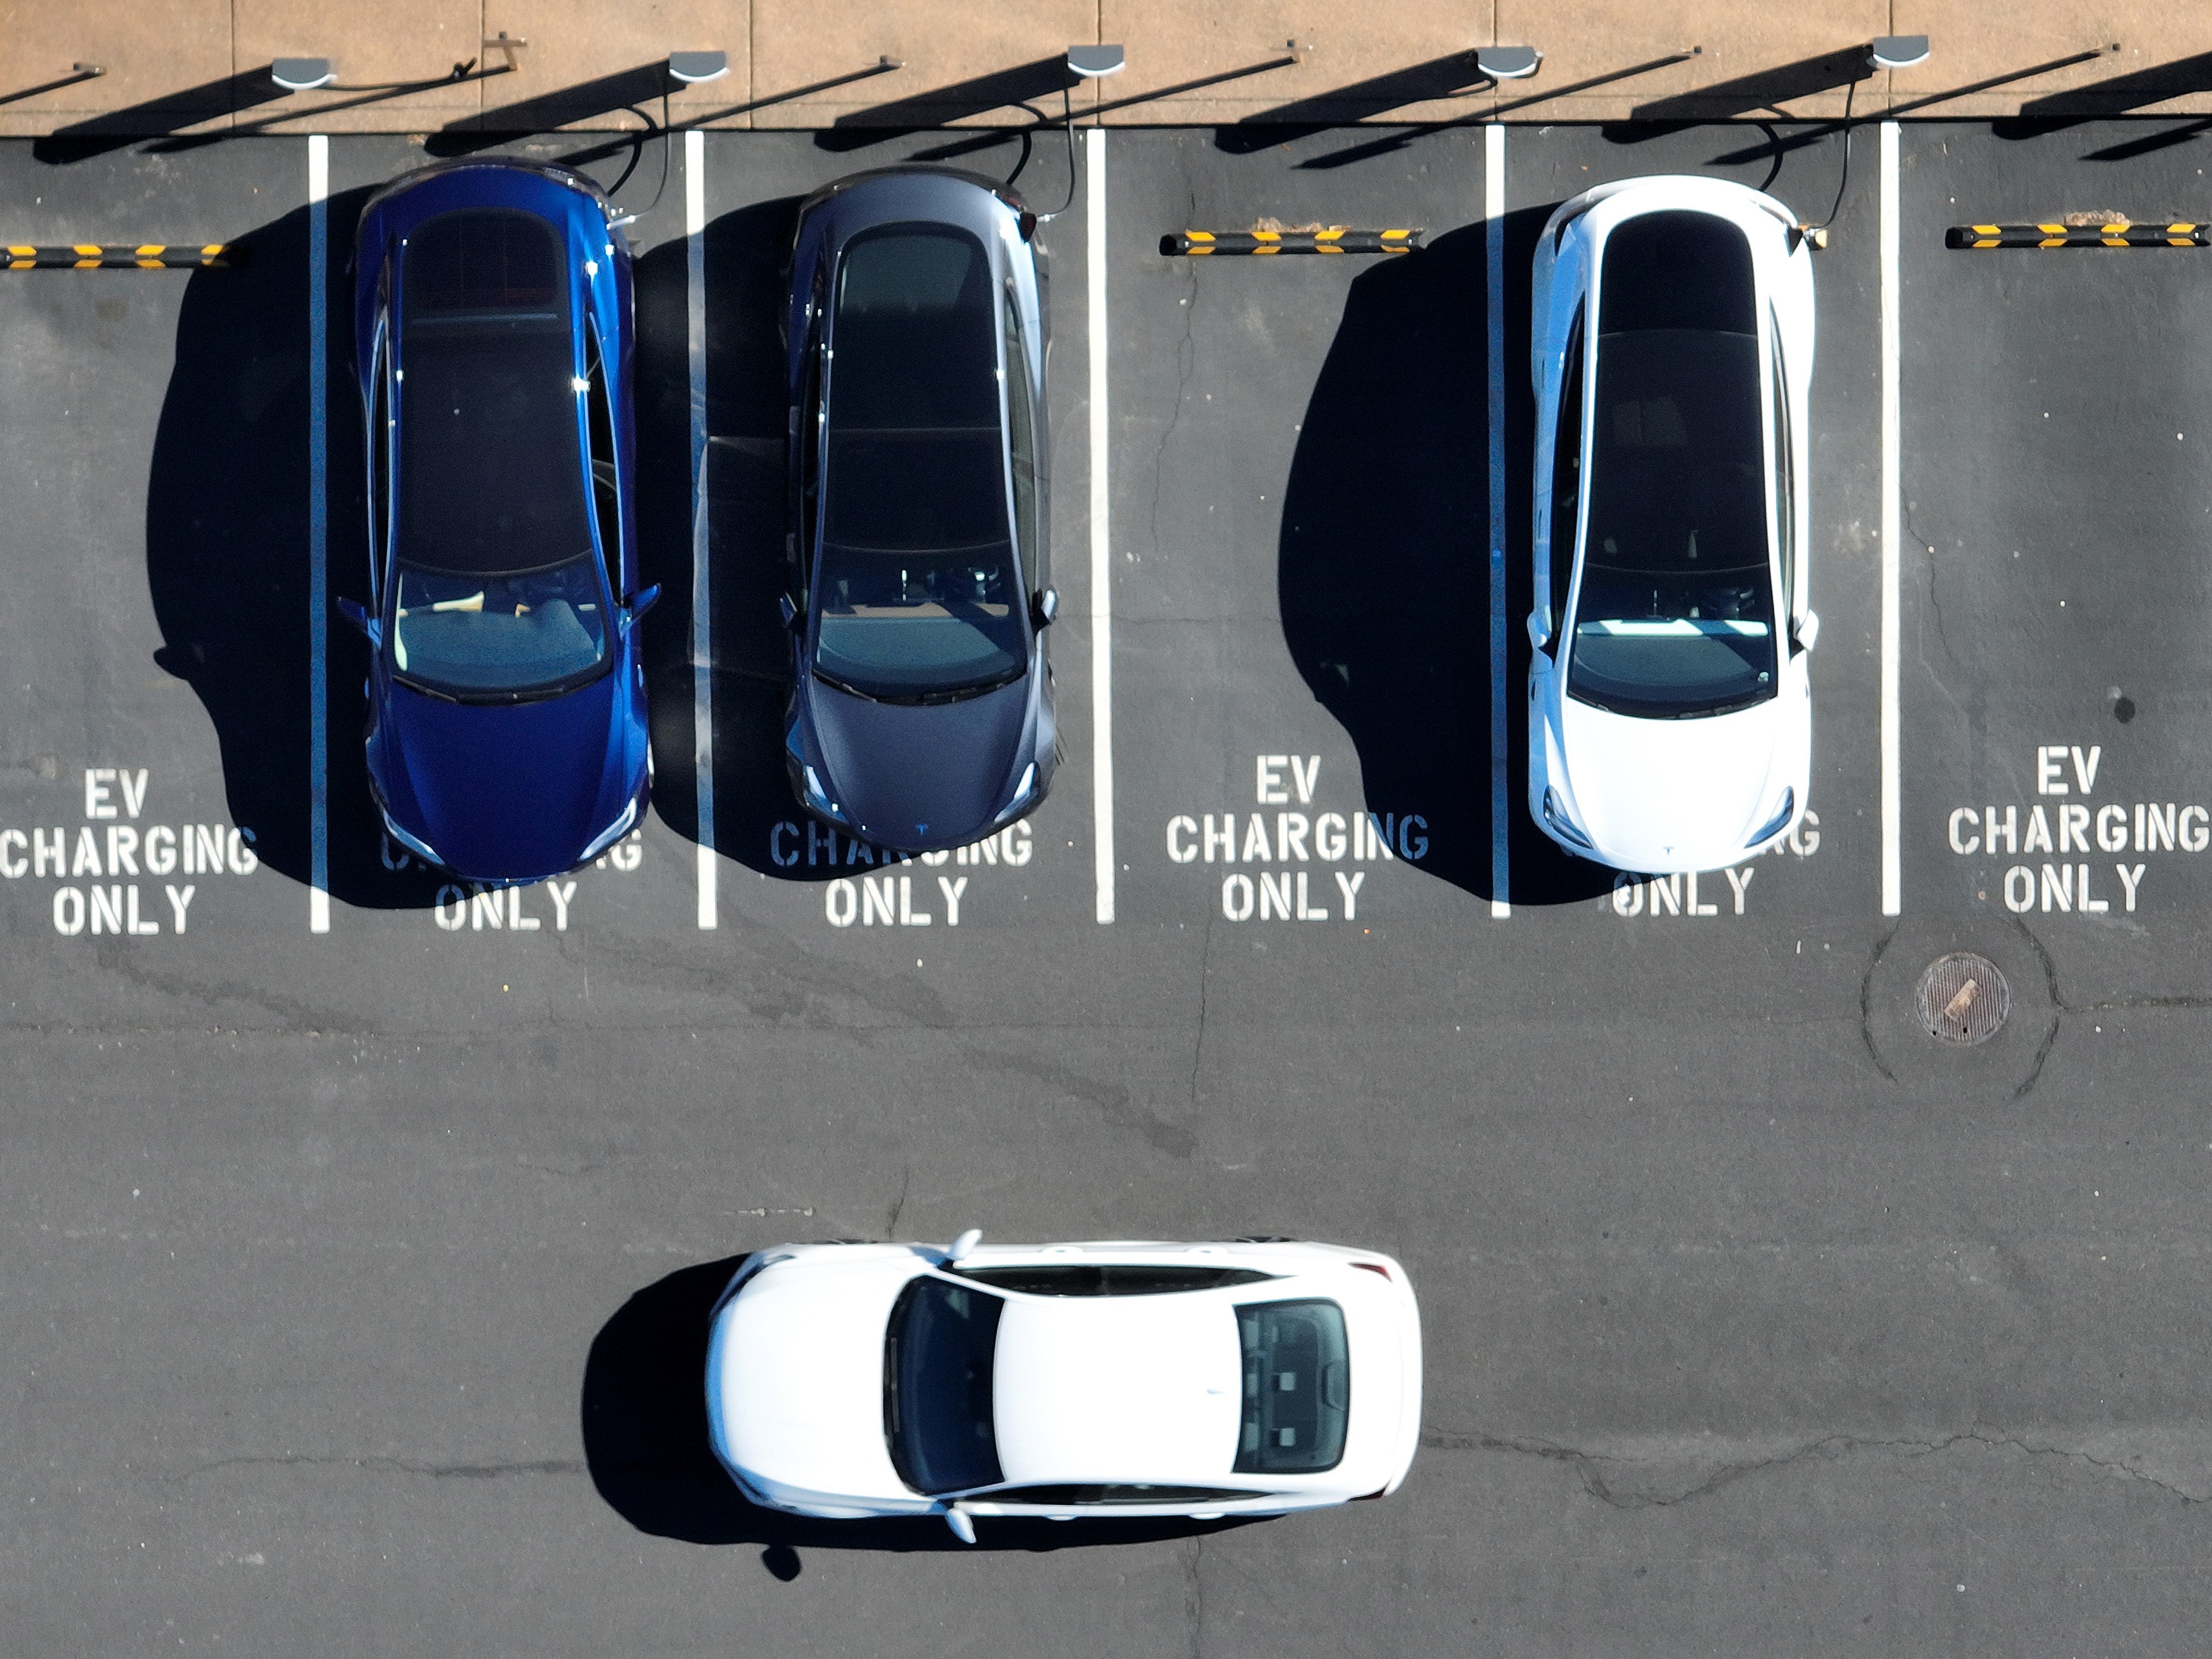 Electric cars recharge at a Tesla charger station on 15 February, 2023 in Corte Madera, California